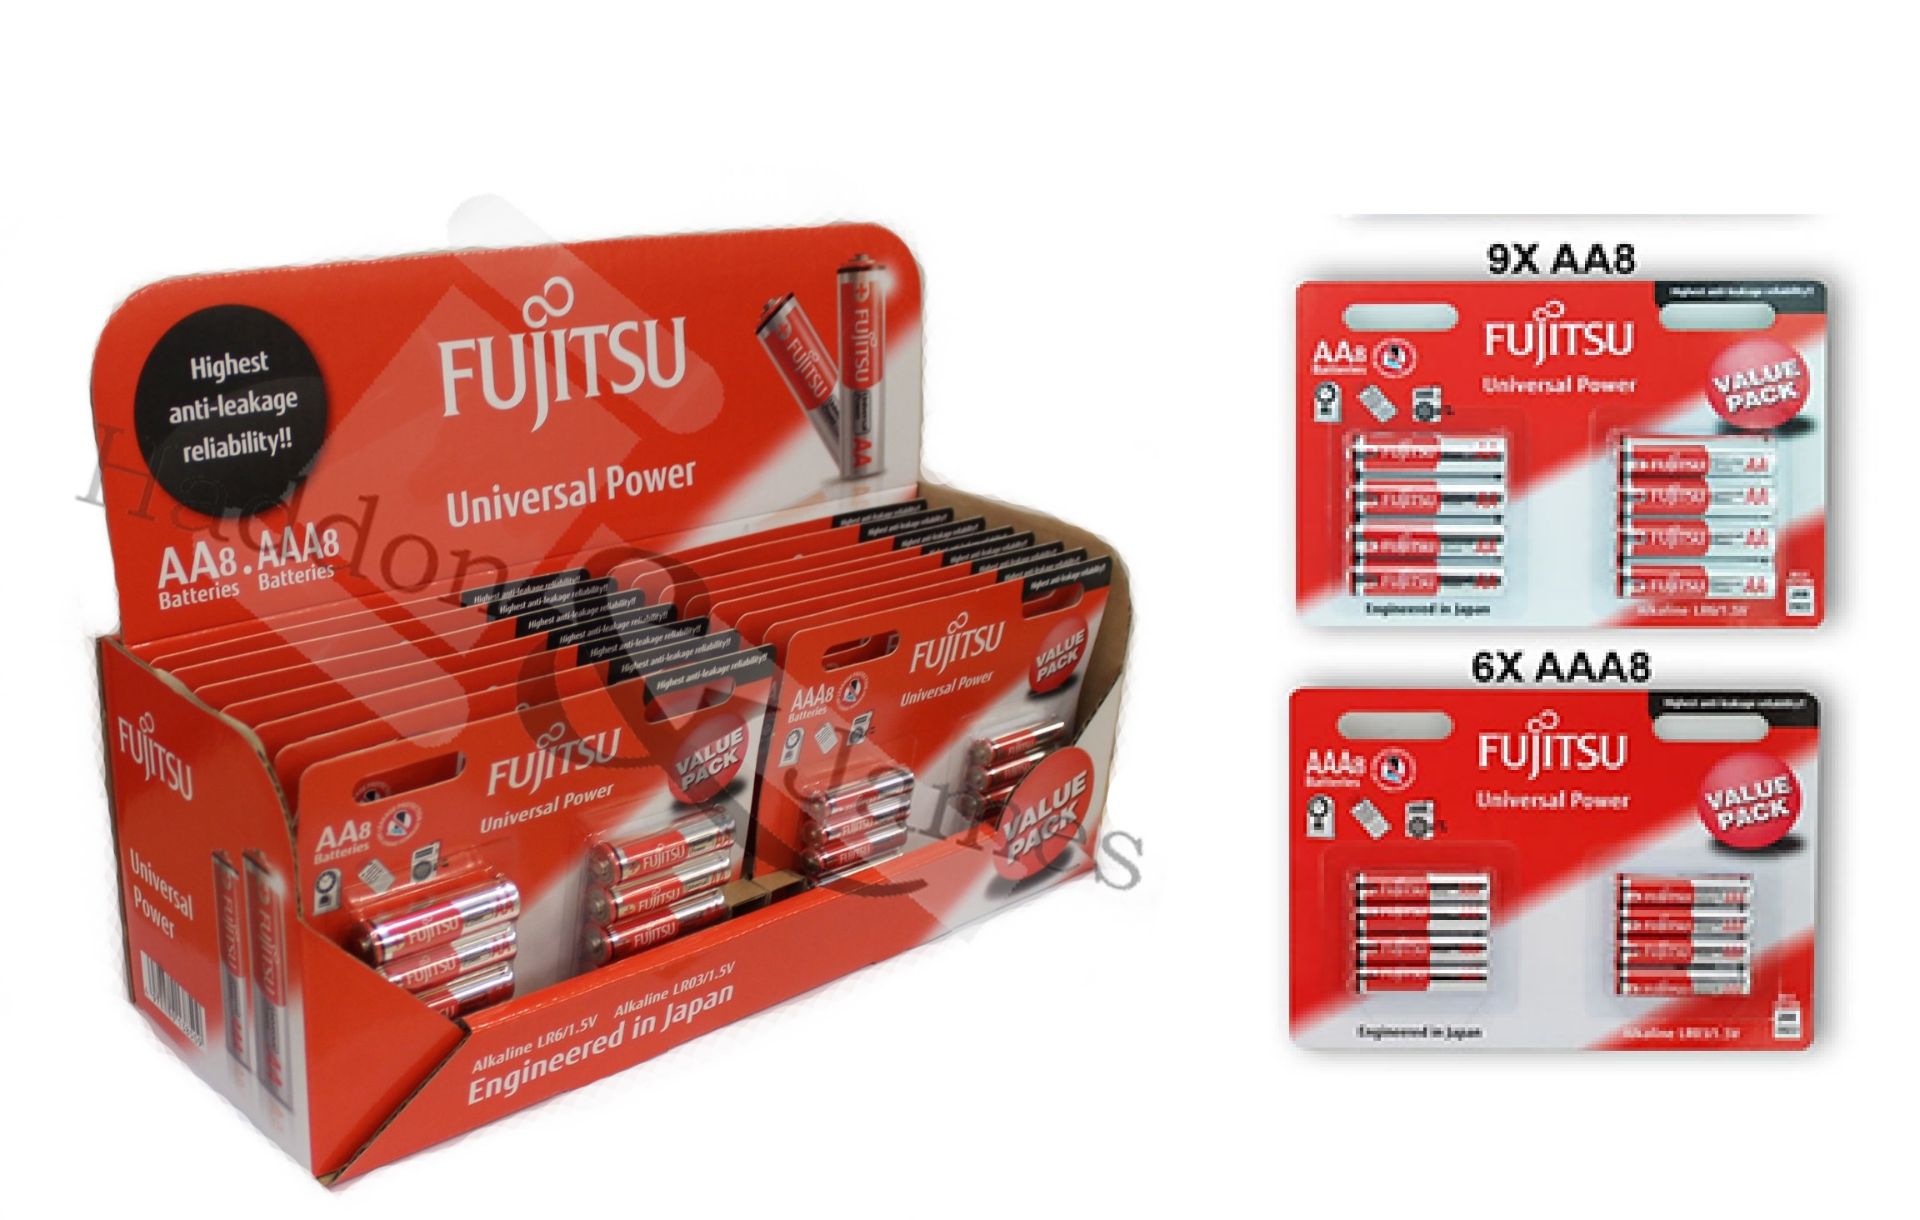 V Brand New Fujistu Universal Power Assorted Pack of Alkaline Batteries (Contains 120 AA & AAA